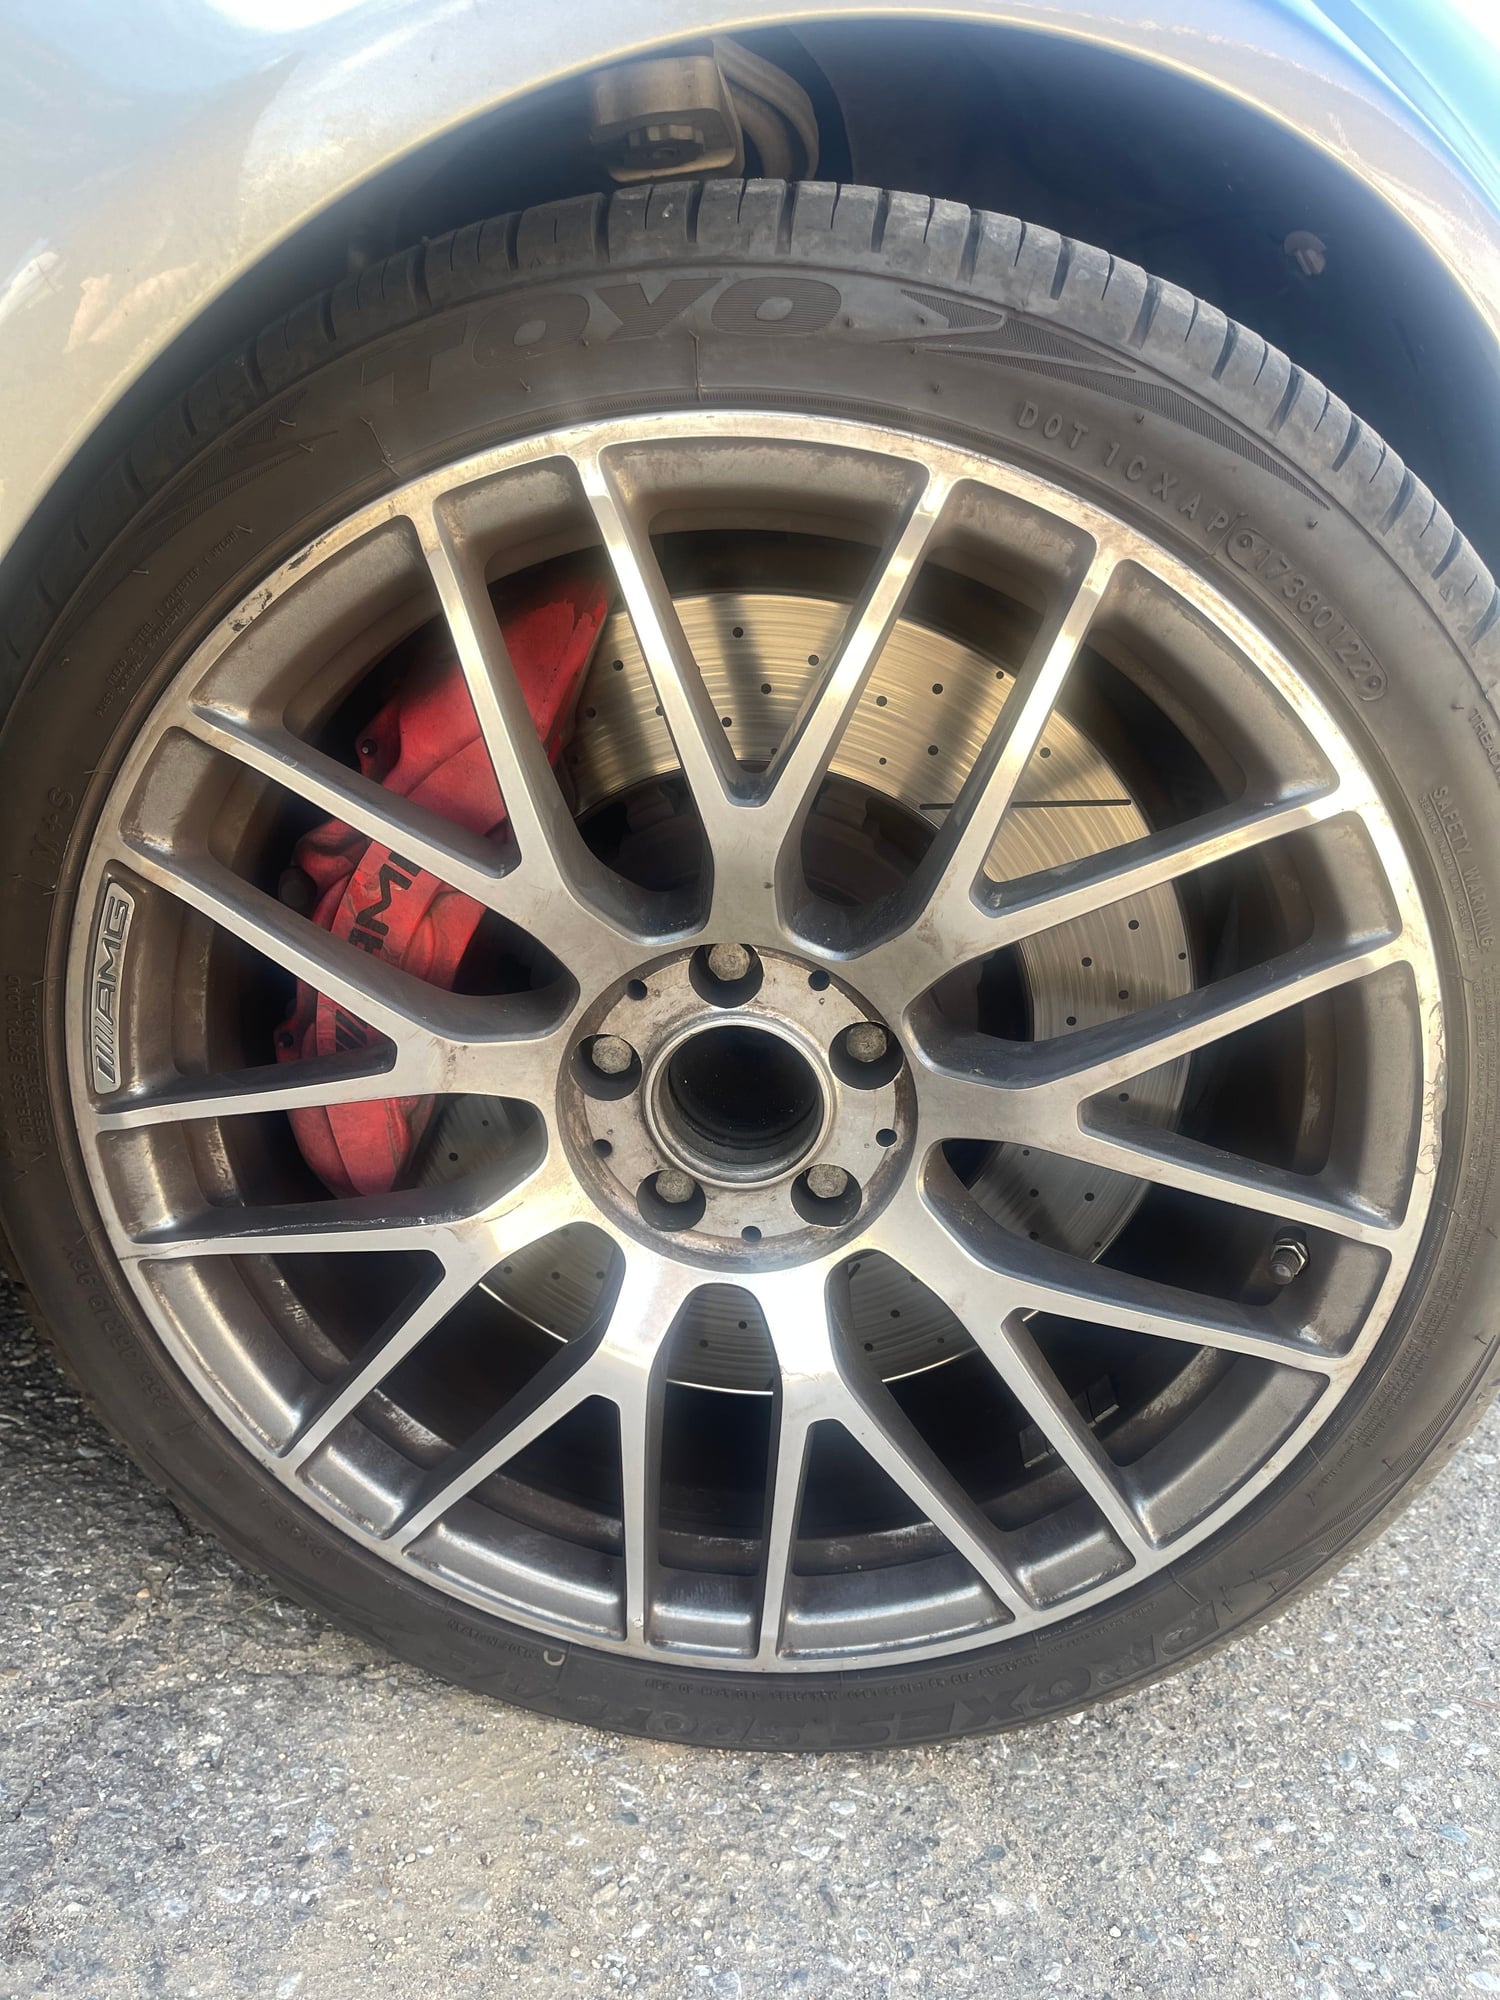 Wheels and Tires/Axles - 2016 AMG C63S OEM WHEELS - Used - 2016 to 2019 Mercedes-Benz C63 AMG S - Phelan, CA 92371, United States